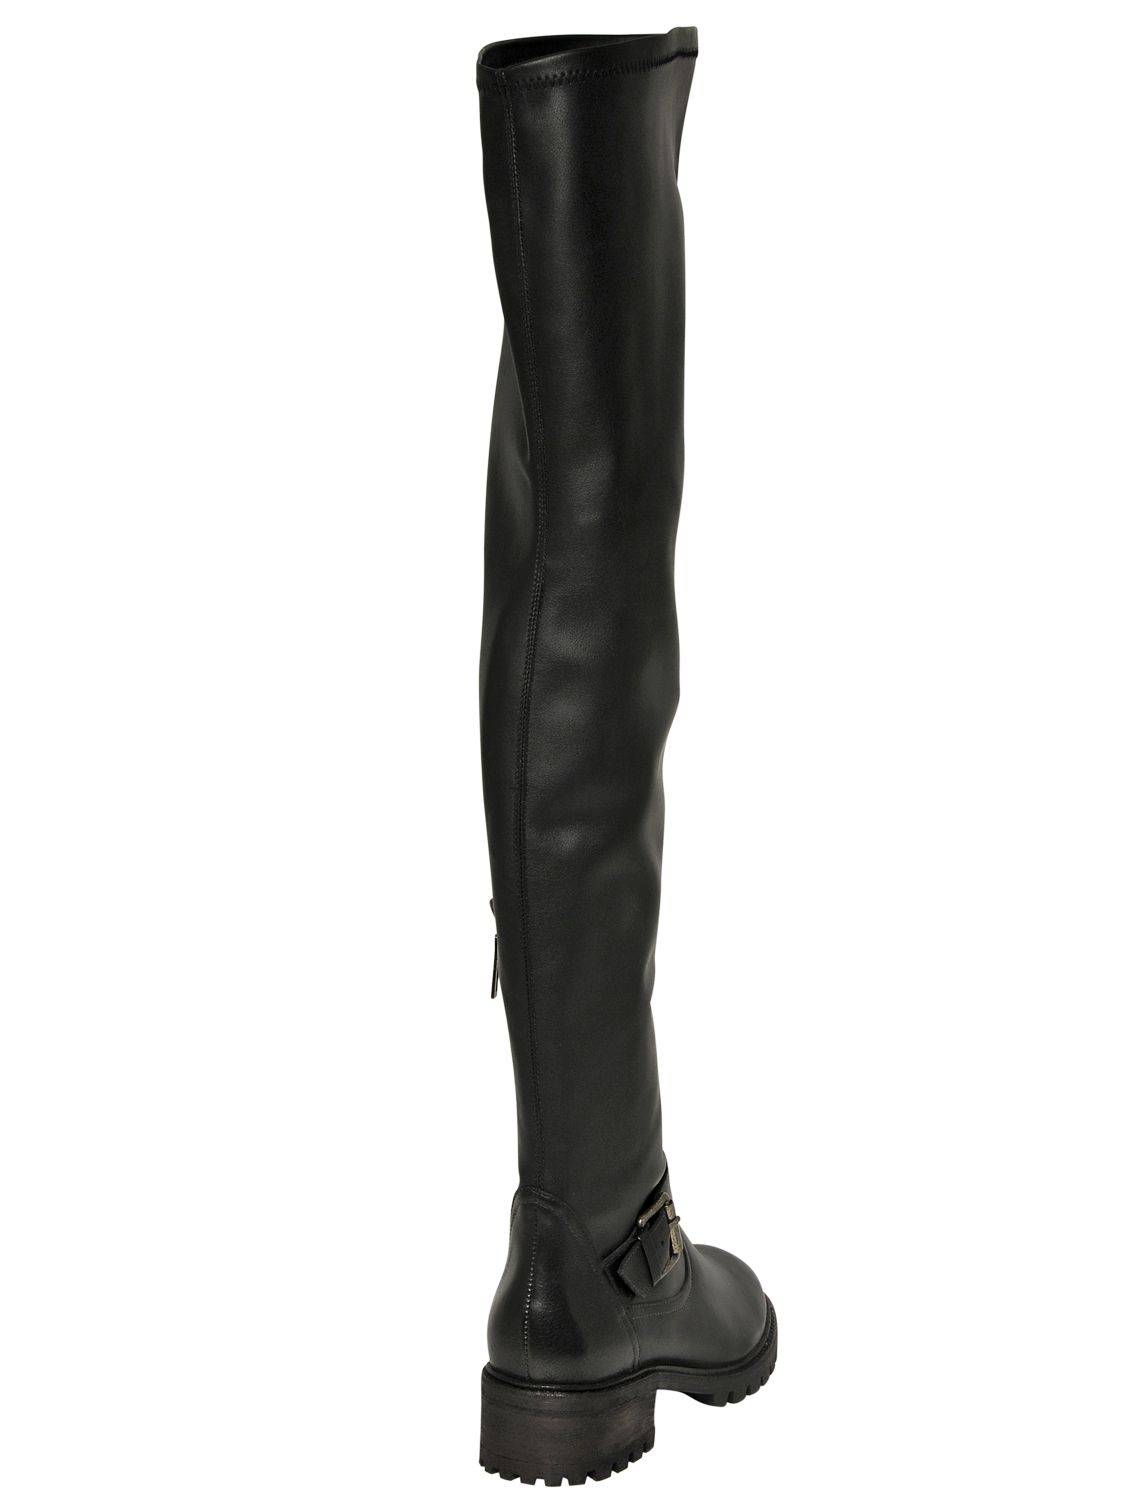 Lyst - Schutz 30Mm Calf Leather Over The Knee Boots in Black